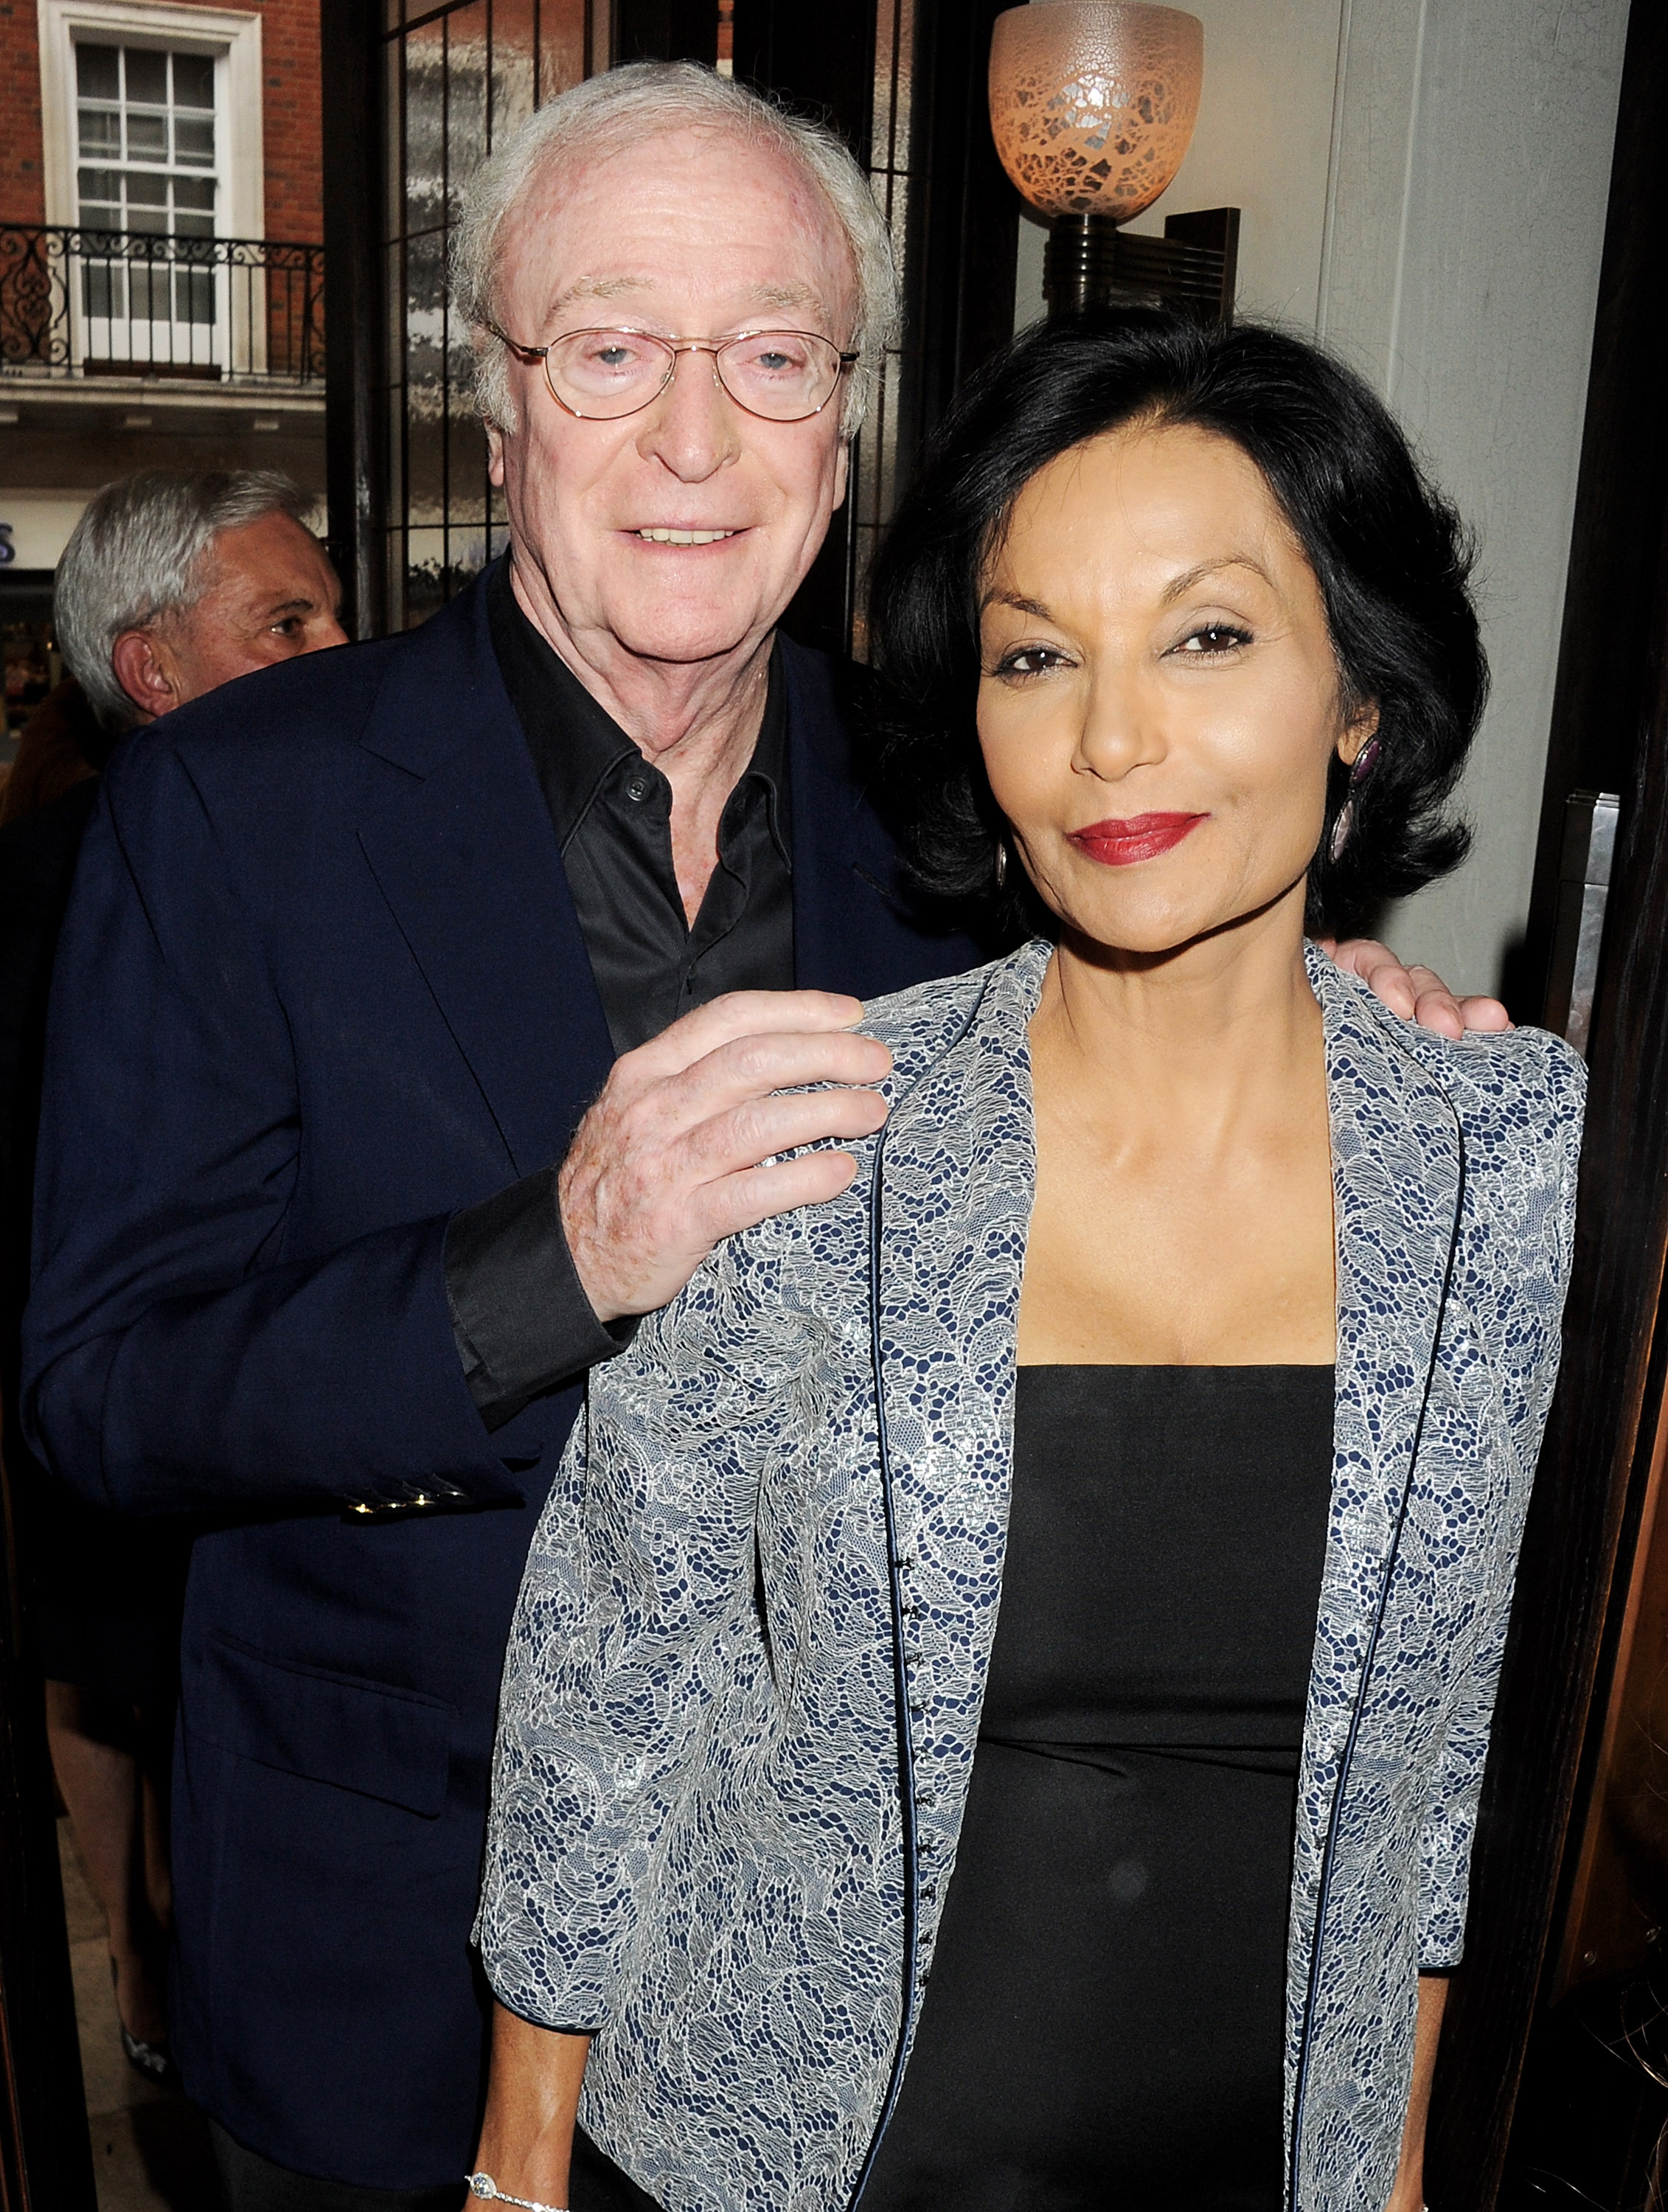 Sir Michael Caine and Shakira Caine attend an event on June 25, 2012 in London, England. | Source: Getty Images